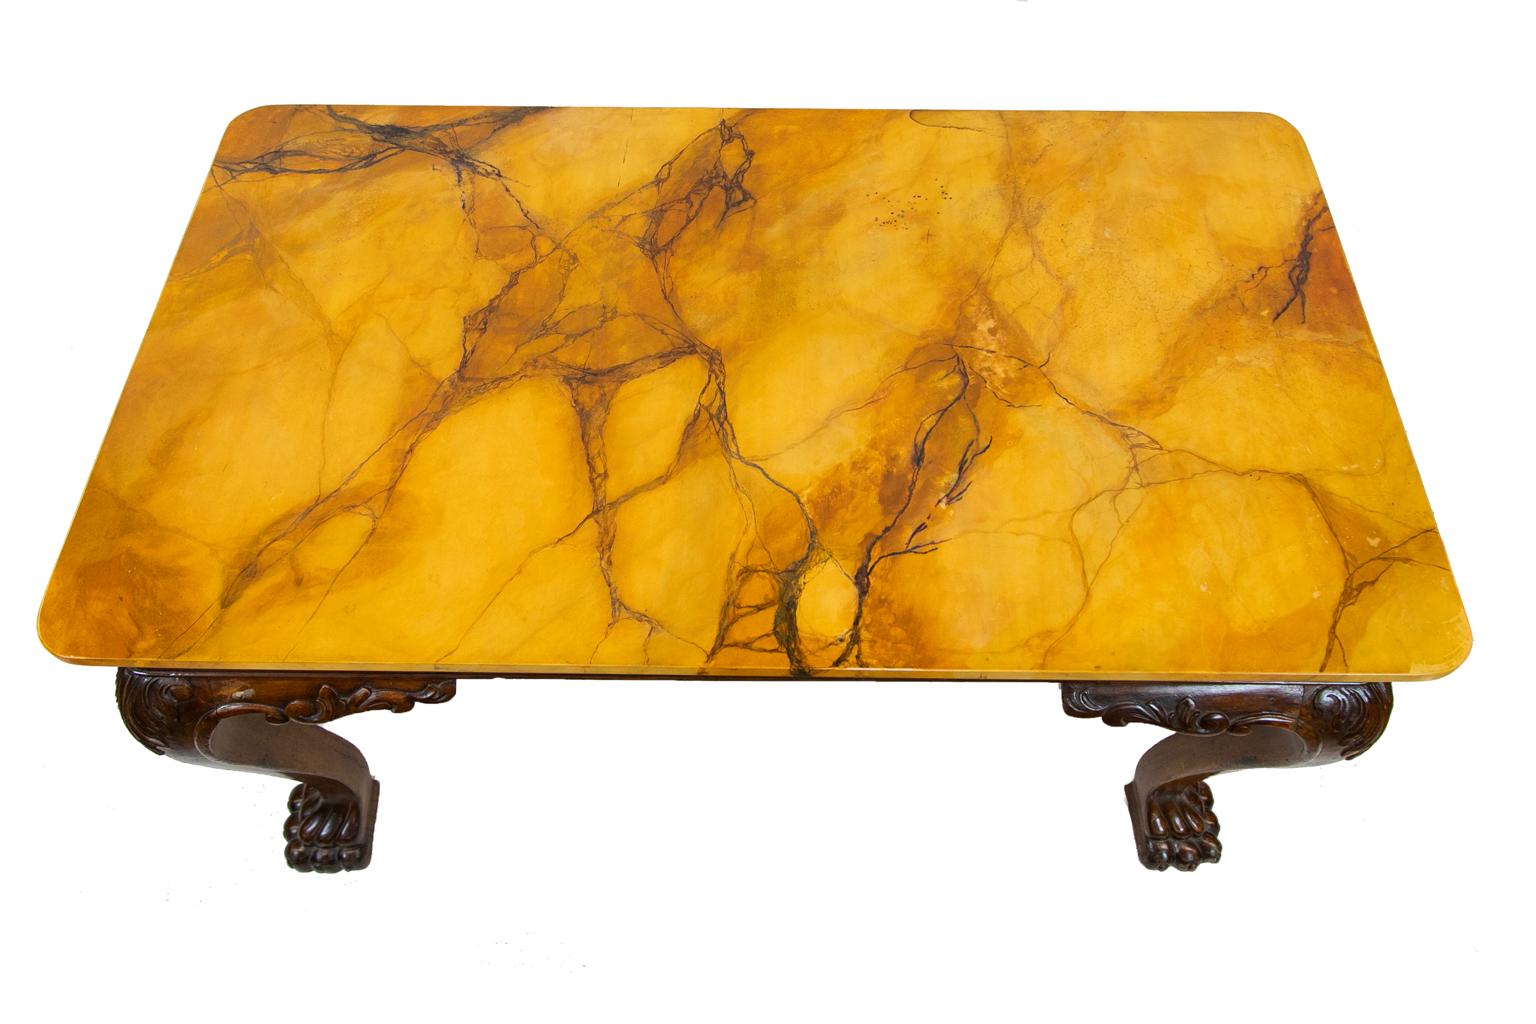 English Chippendale simulated marble-top center table is faux painted to simulate Sienna marble. The apron is bookmatched banded in mahogany with very large cabriole legs. There are acanthus leaf carvings in high relief on the legs which terminate